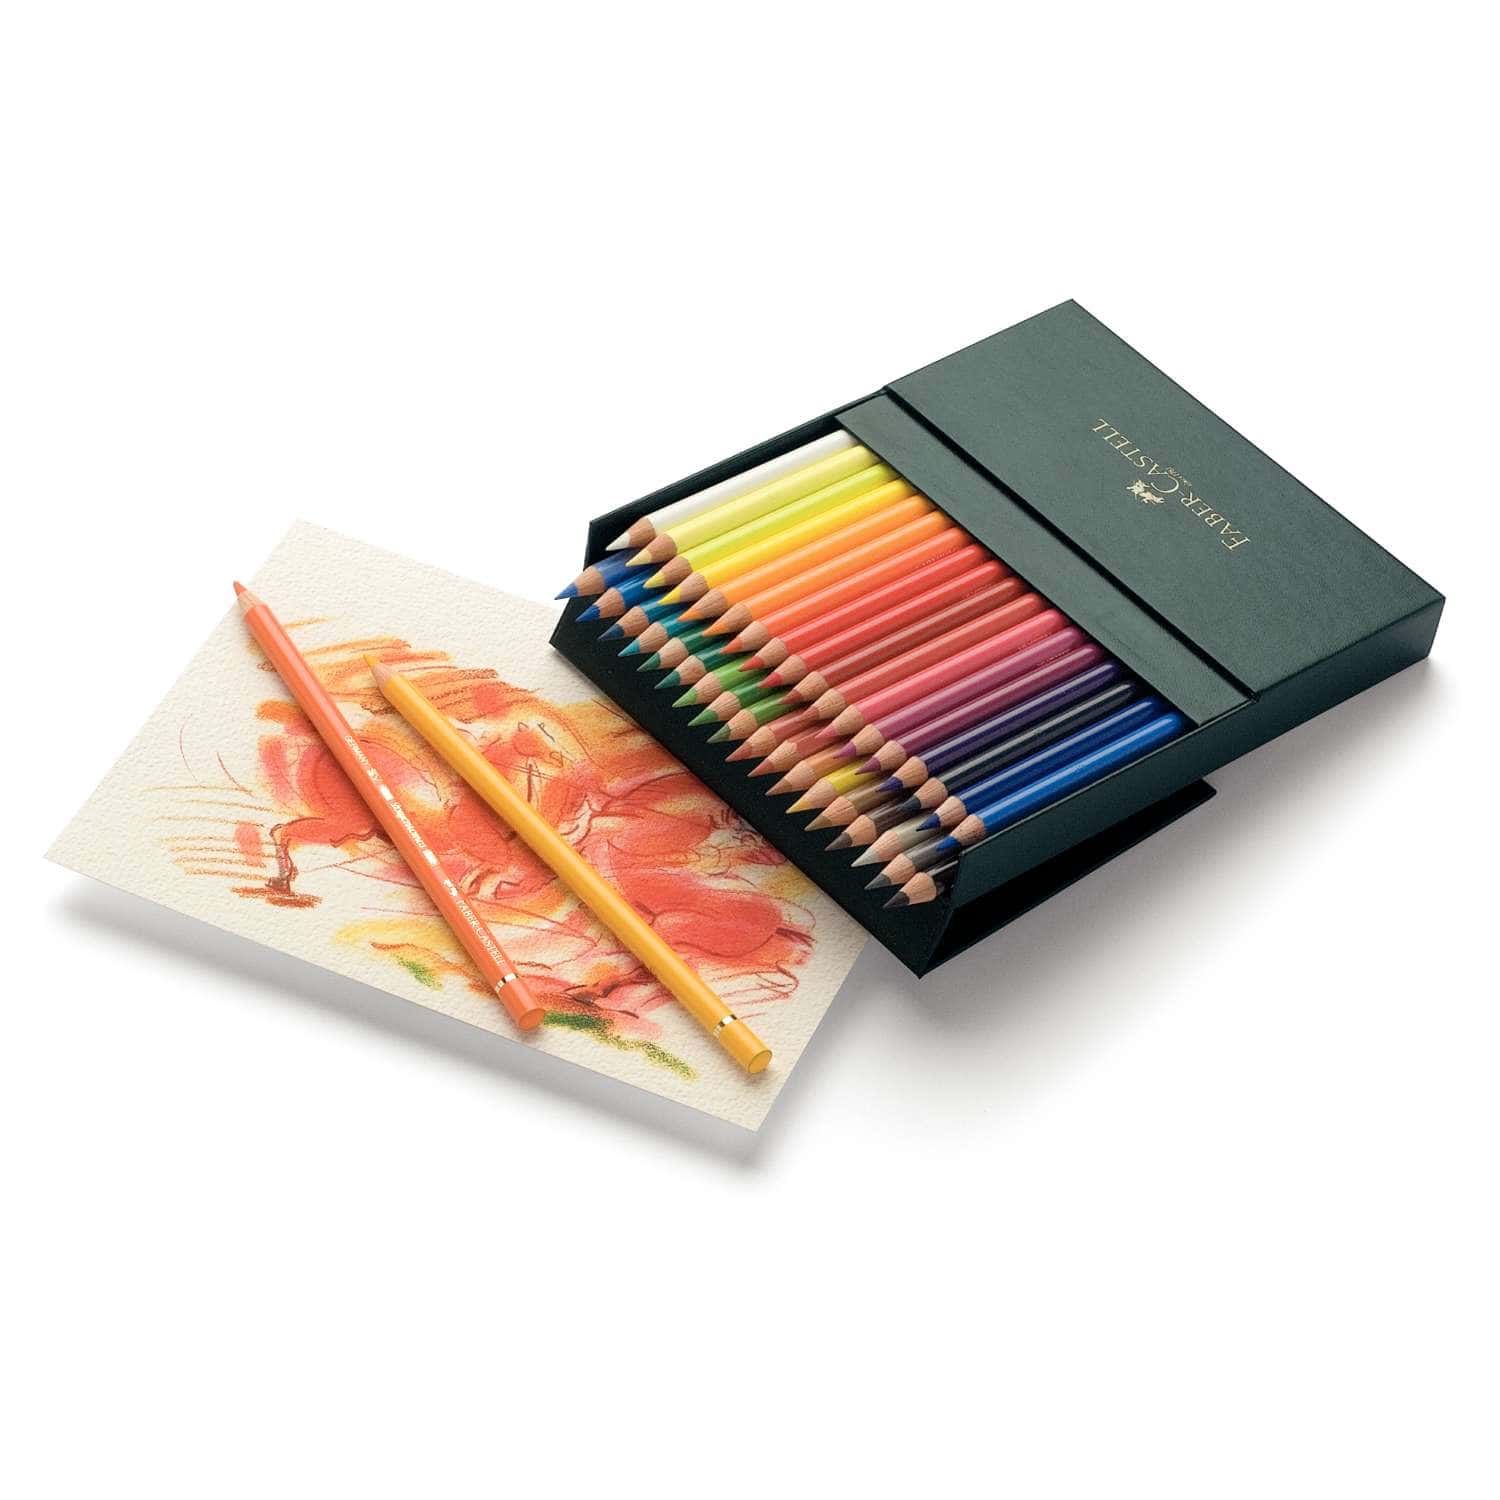 Faber-Castell Polychromos, Atelierbox, con matite colorate per